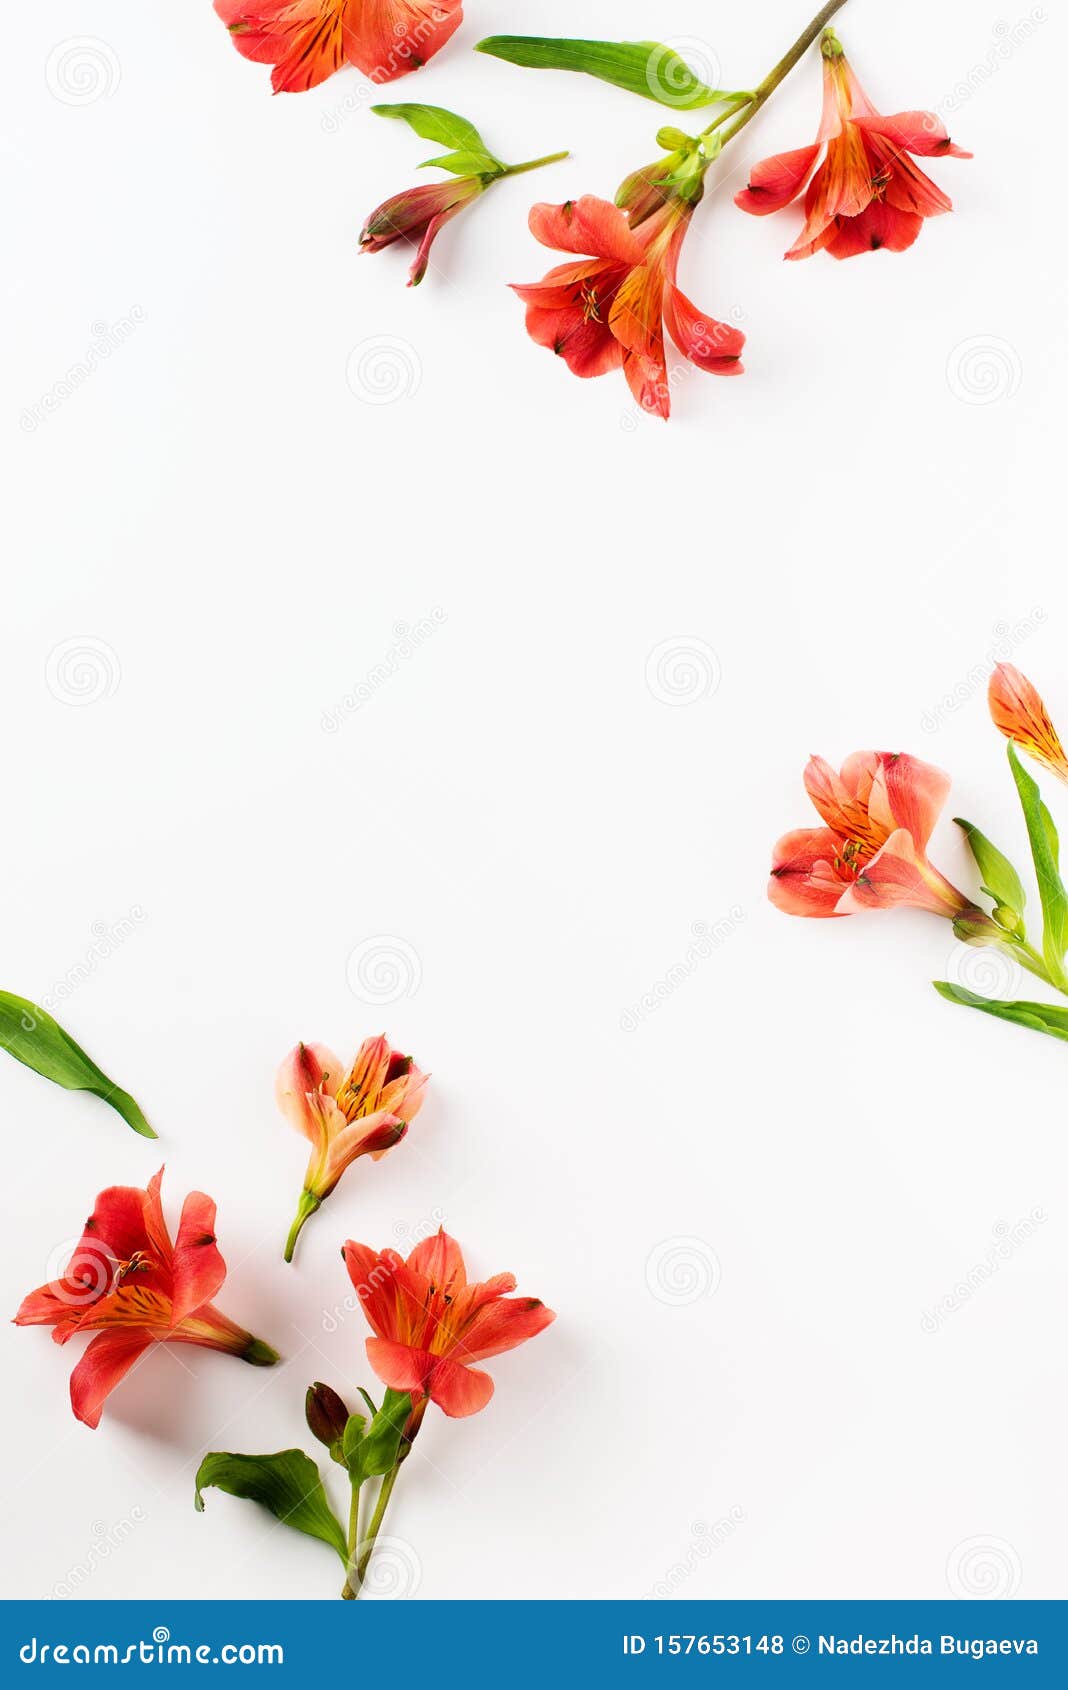 beauty flowers flat lay with red alstroemeria frame on white background